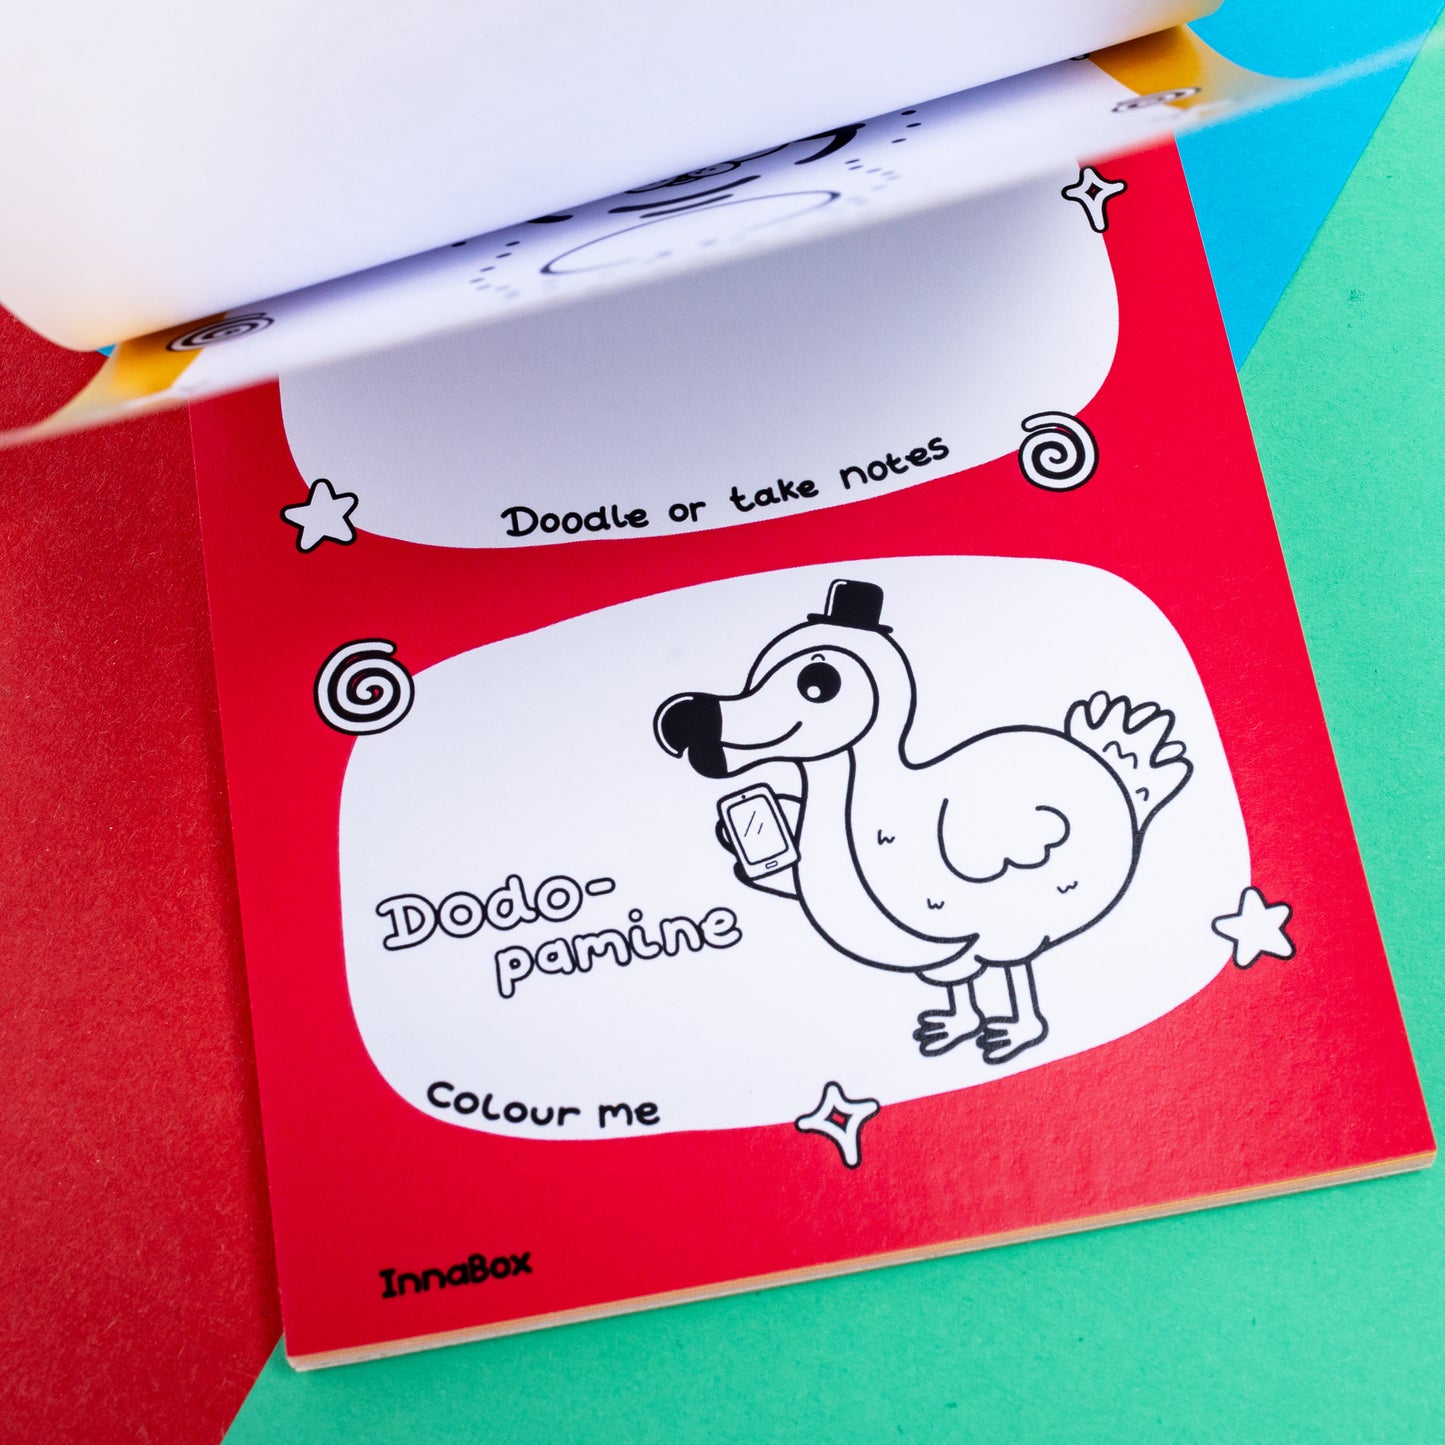 A page of a red outlined notebook with the words 'Dodo-pamine' with a Dodo drawing next to it with a phone and a top hat. The words 'Doodle or take notes' above it and below it 'colour me' it is on a red, green and blue background.  A hand drawn design to raise awareness for neurodiversity, adhd, autism.